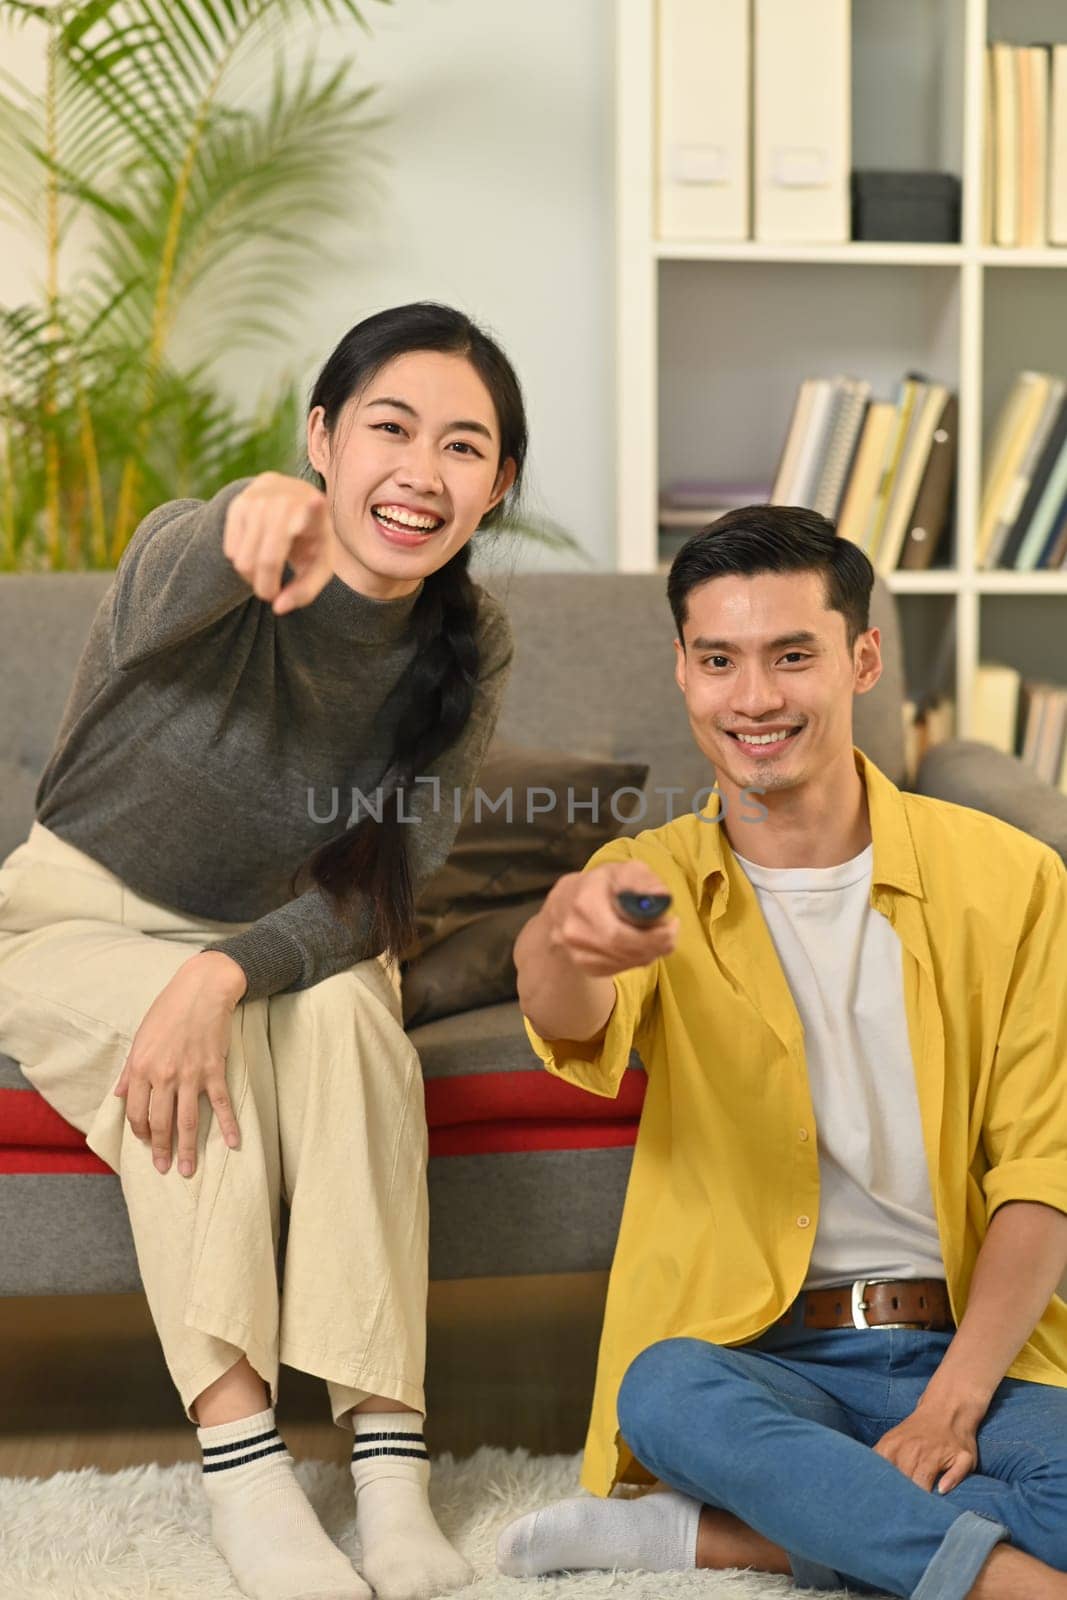 Joyful young couple relaxing and watching TV together on a couch in cozy home. People and leisure activity concept.